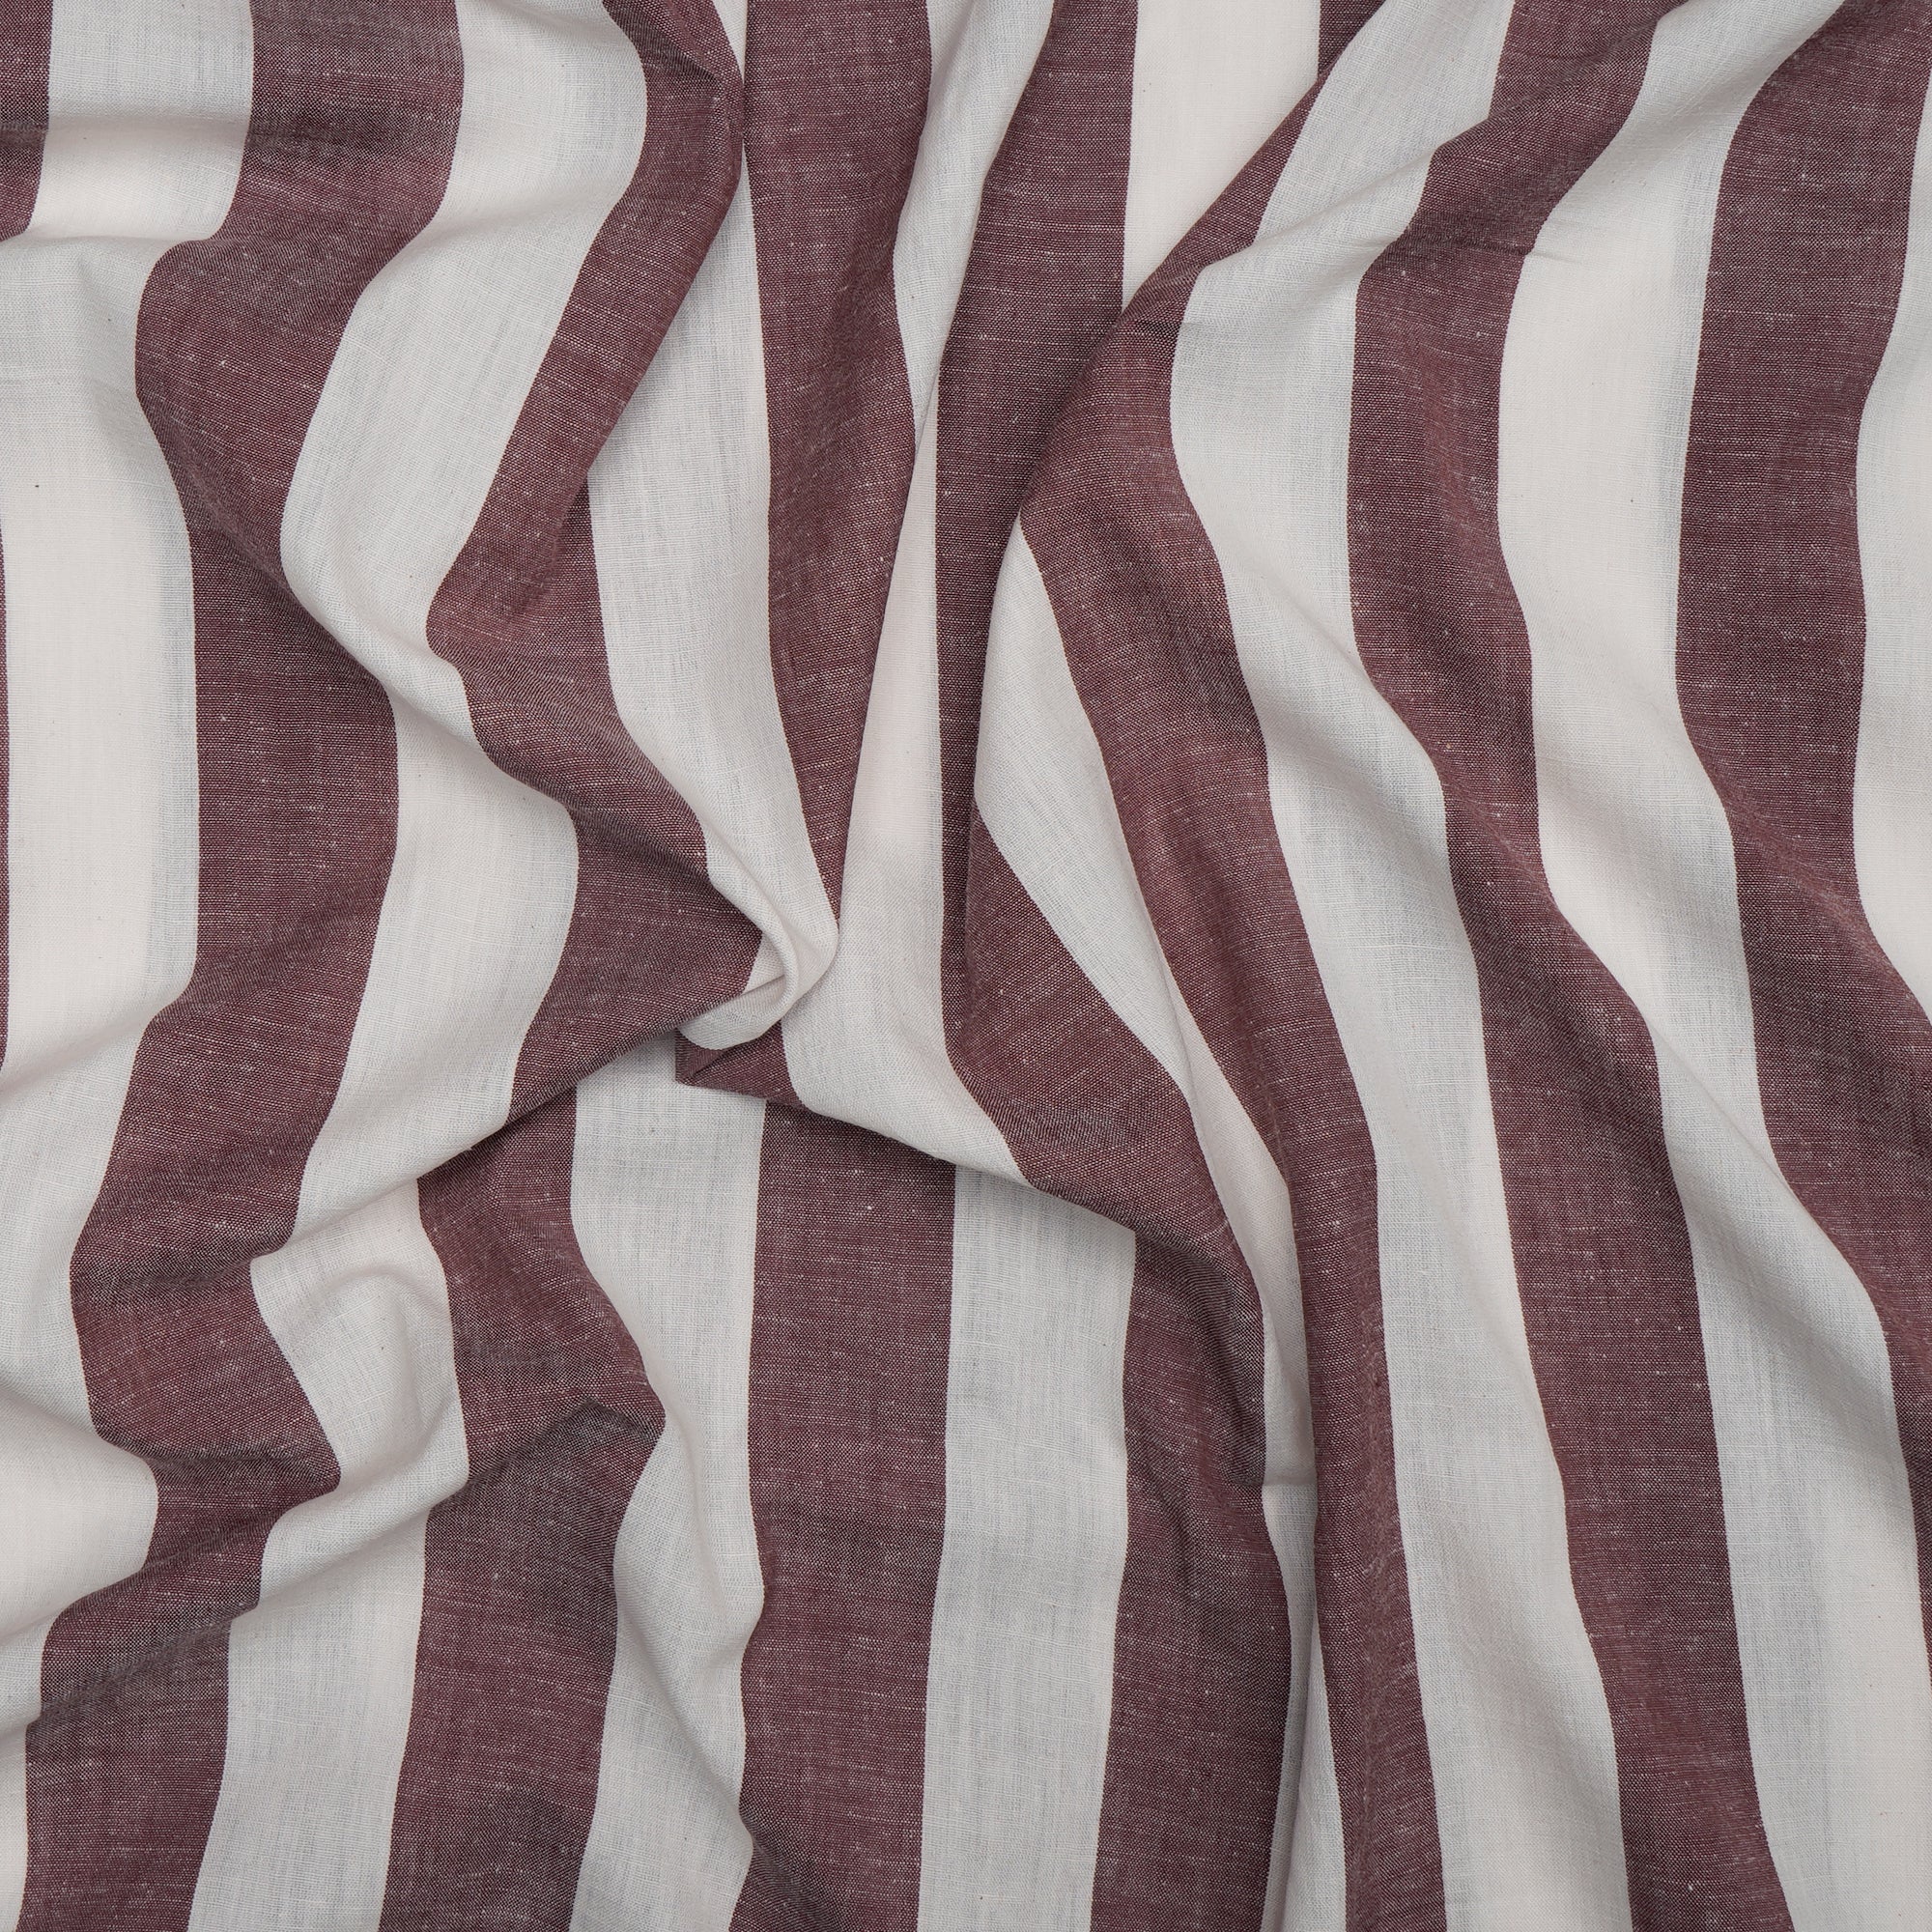 White-Brown Striped Pattern Handwoven Cotton Fabric